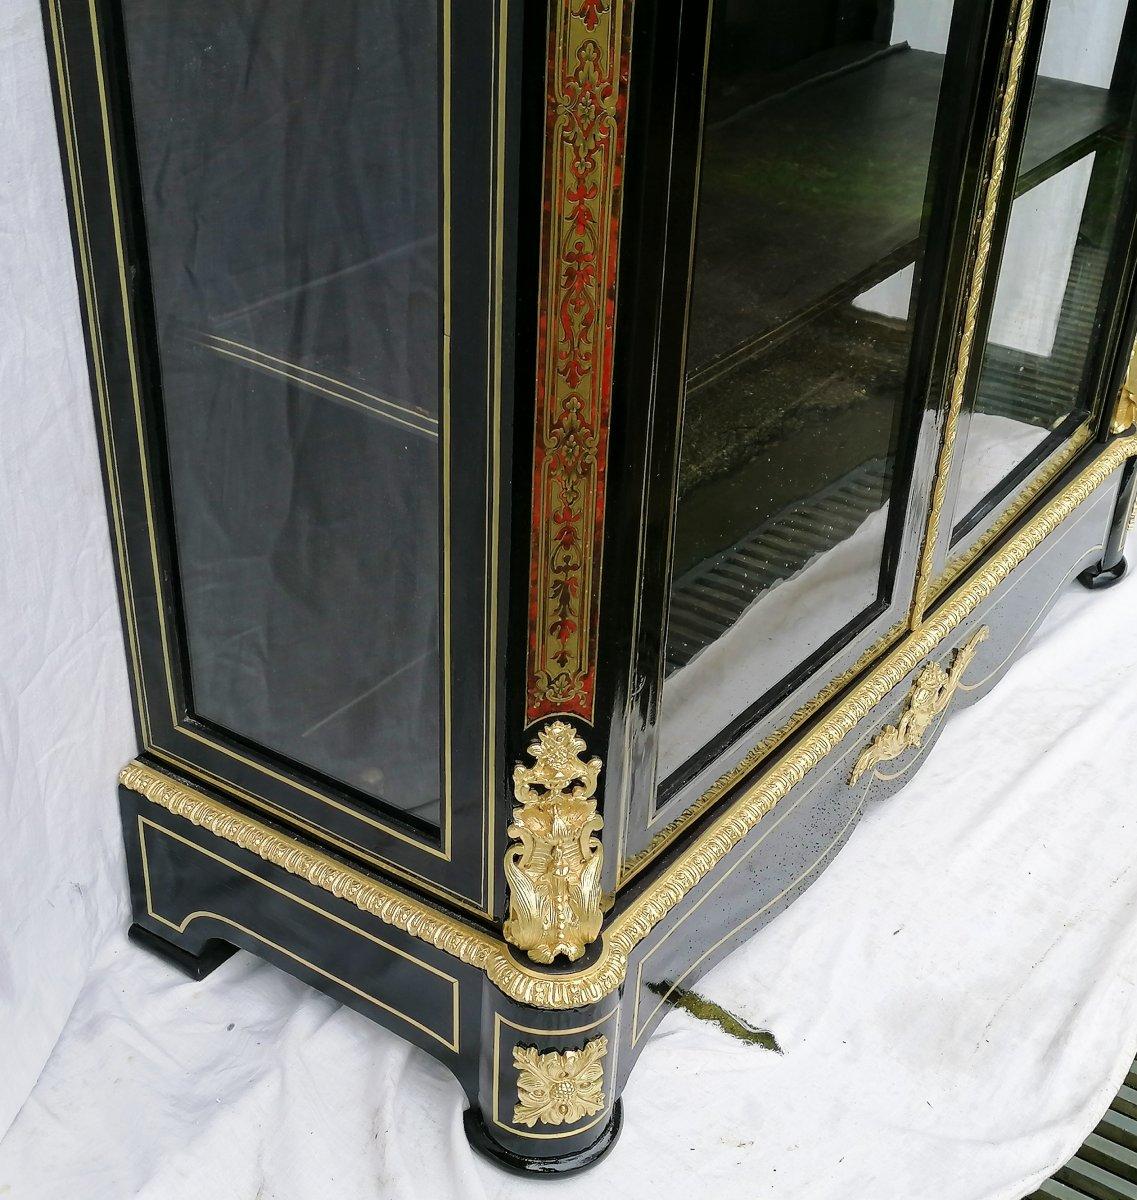 Napoleon III vitrine bookcase display cabinet in Boulle style marquetry opening with 2 doors, blackened wood and marquetry with brass threads and brass band on red tortoiseshell on the cornice and uprights. Beautiful gilded bronze ornaments.